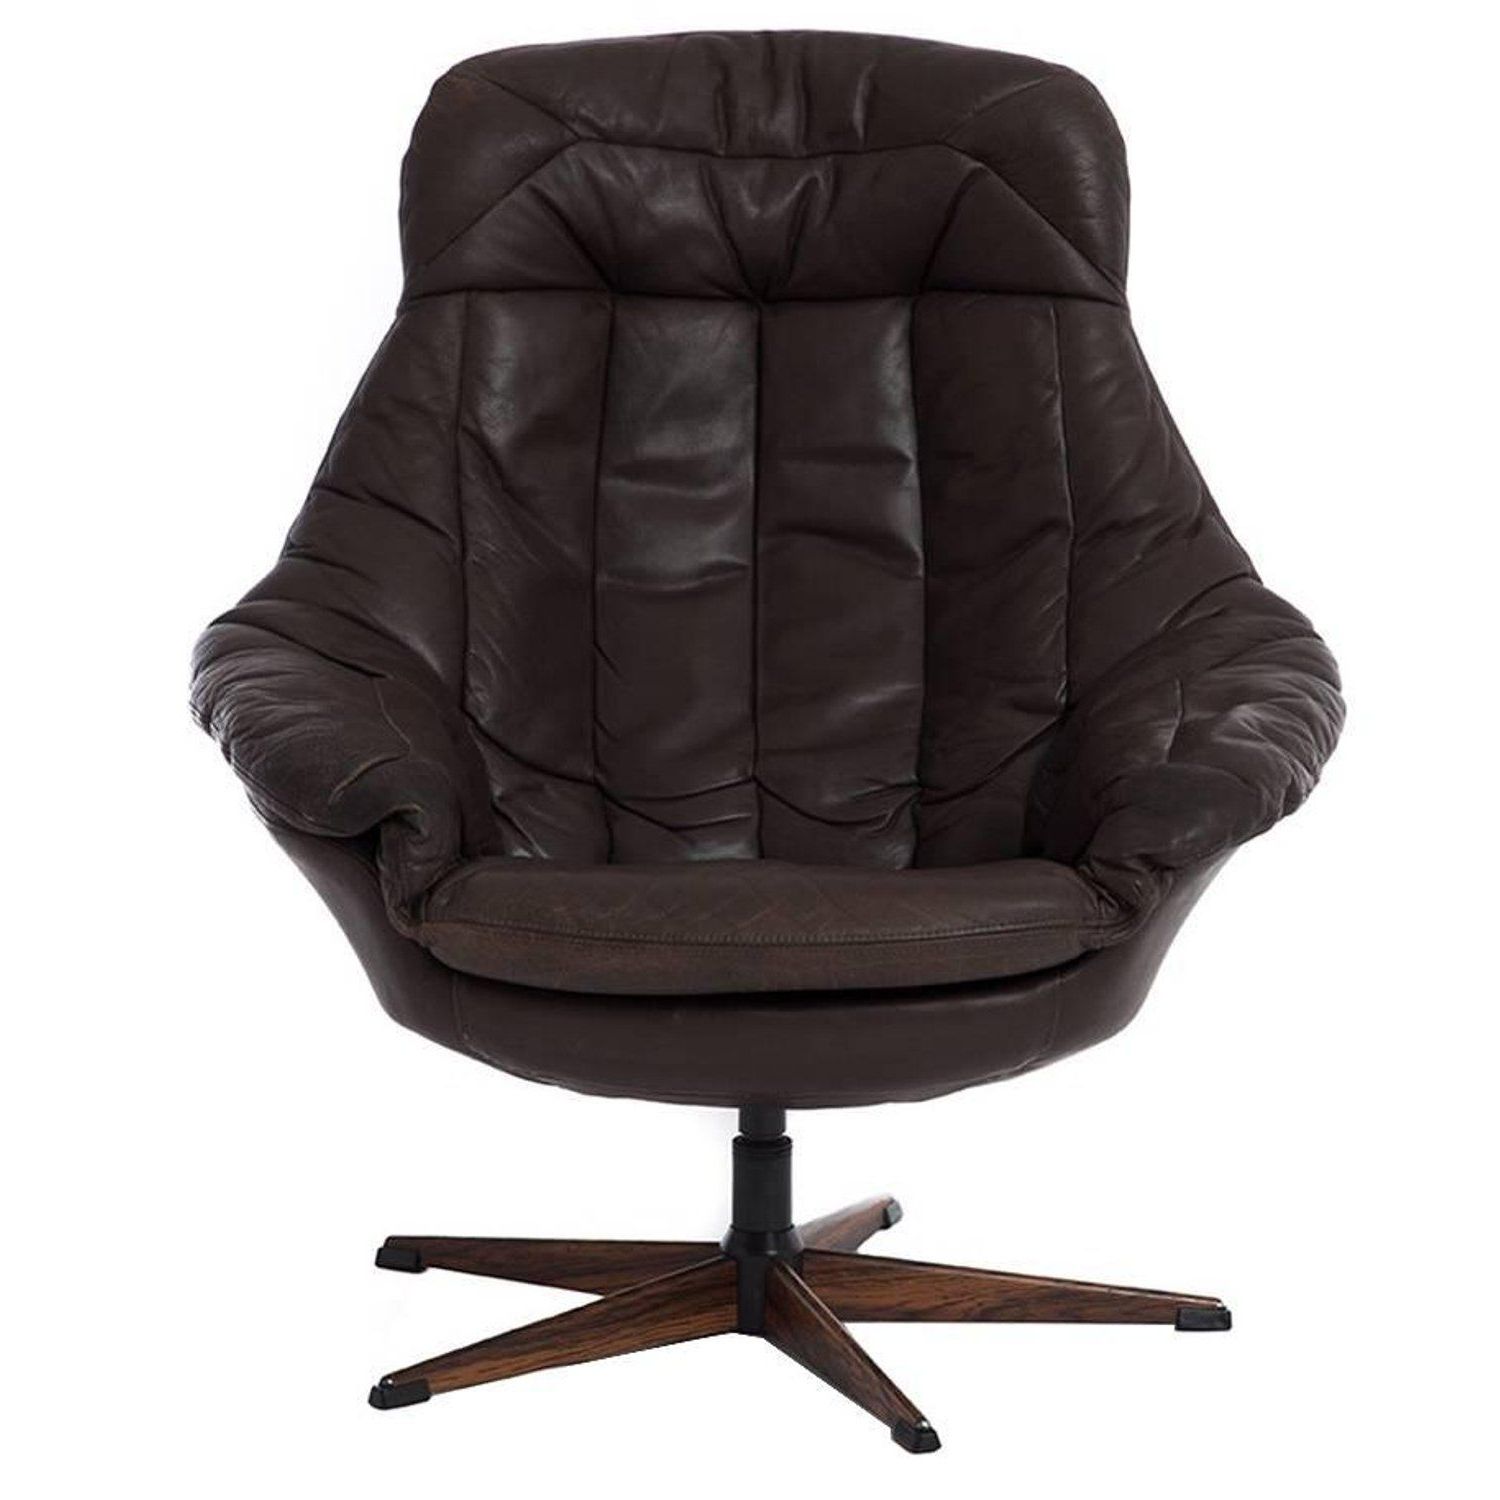 Most Current Espresso Leather Swivel Chairs Pertaining To Danish Modern Swivel Glove Chair In Espresso Leatherh. W (View 16 of 20)